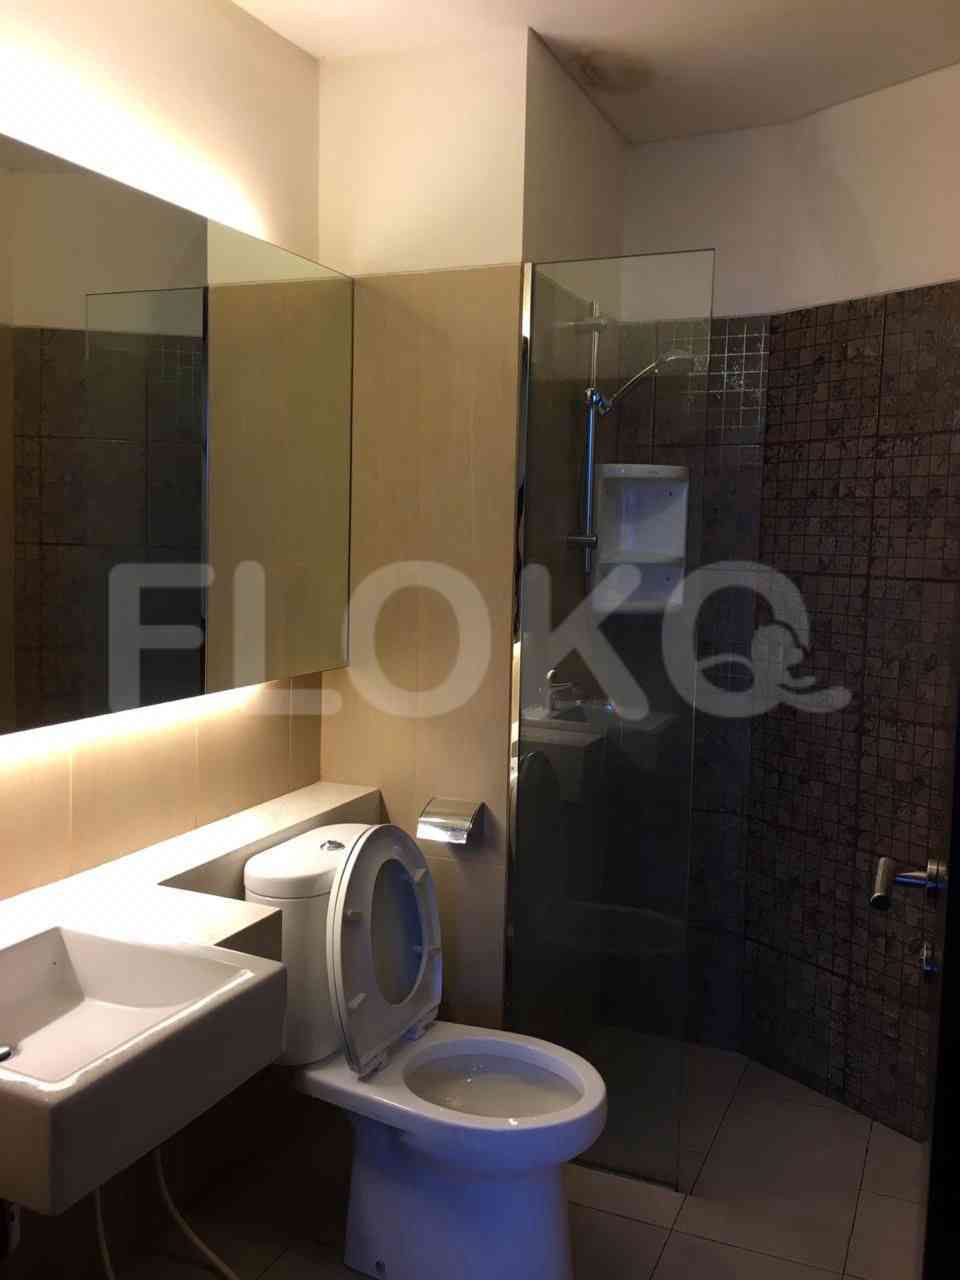 2 Bedroom on 19th Floor for Rent in GP Plaza Apartment - ftaef4 7